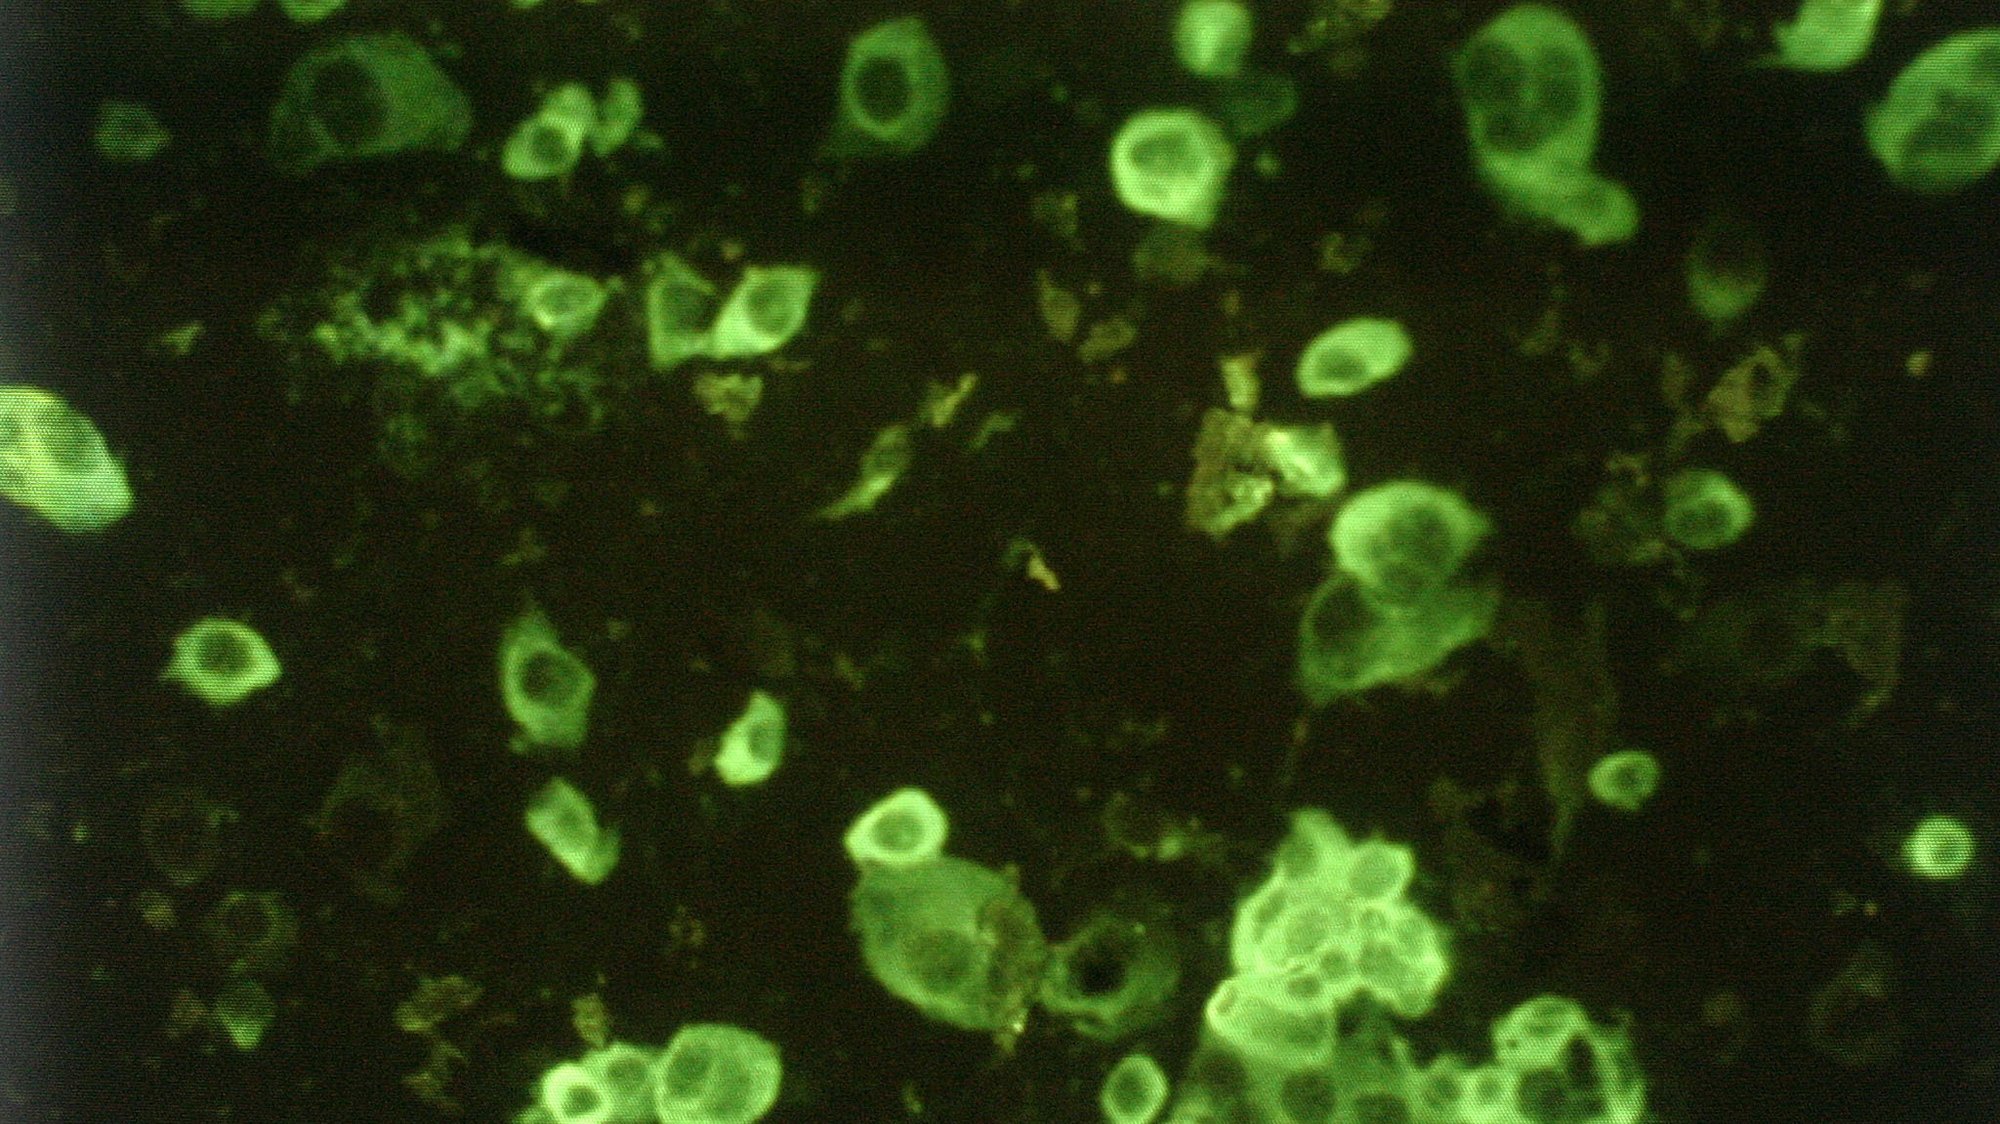 An undated photo shows a microscopic image of human cells (darker) being infected with the Severe Acute Respiratory Syndrome (SARS) virus (lighter).  Hong Kong health authorities said 05 May 2003 that the death rate from the SARS virus in the territory could rise from the current 11 percent to 14 percent with concerns that the virus is mutating and could become more virulent. 
AFP PHOTO/Peter PARKS